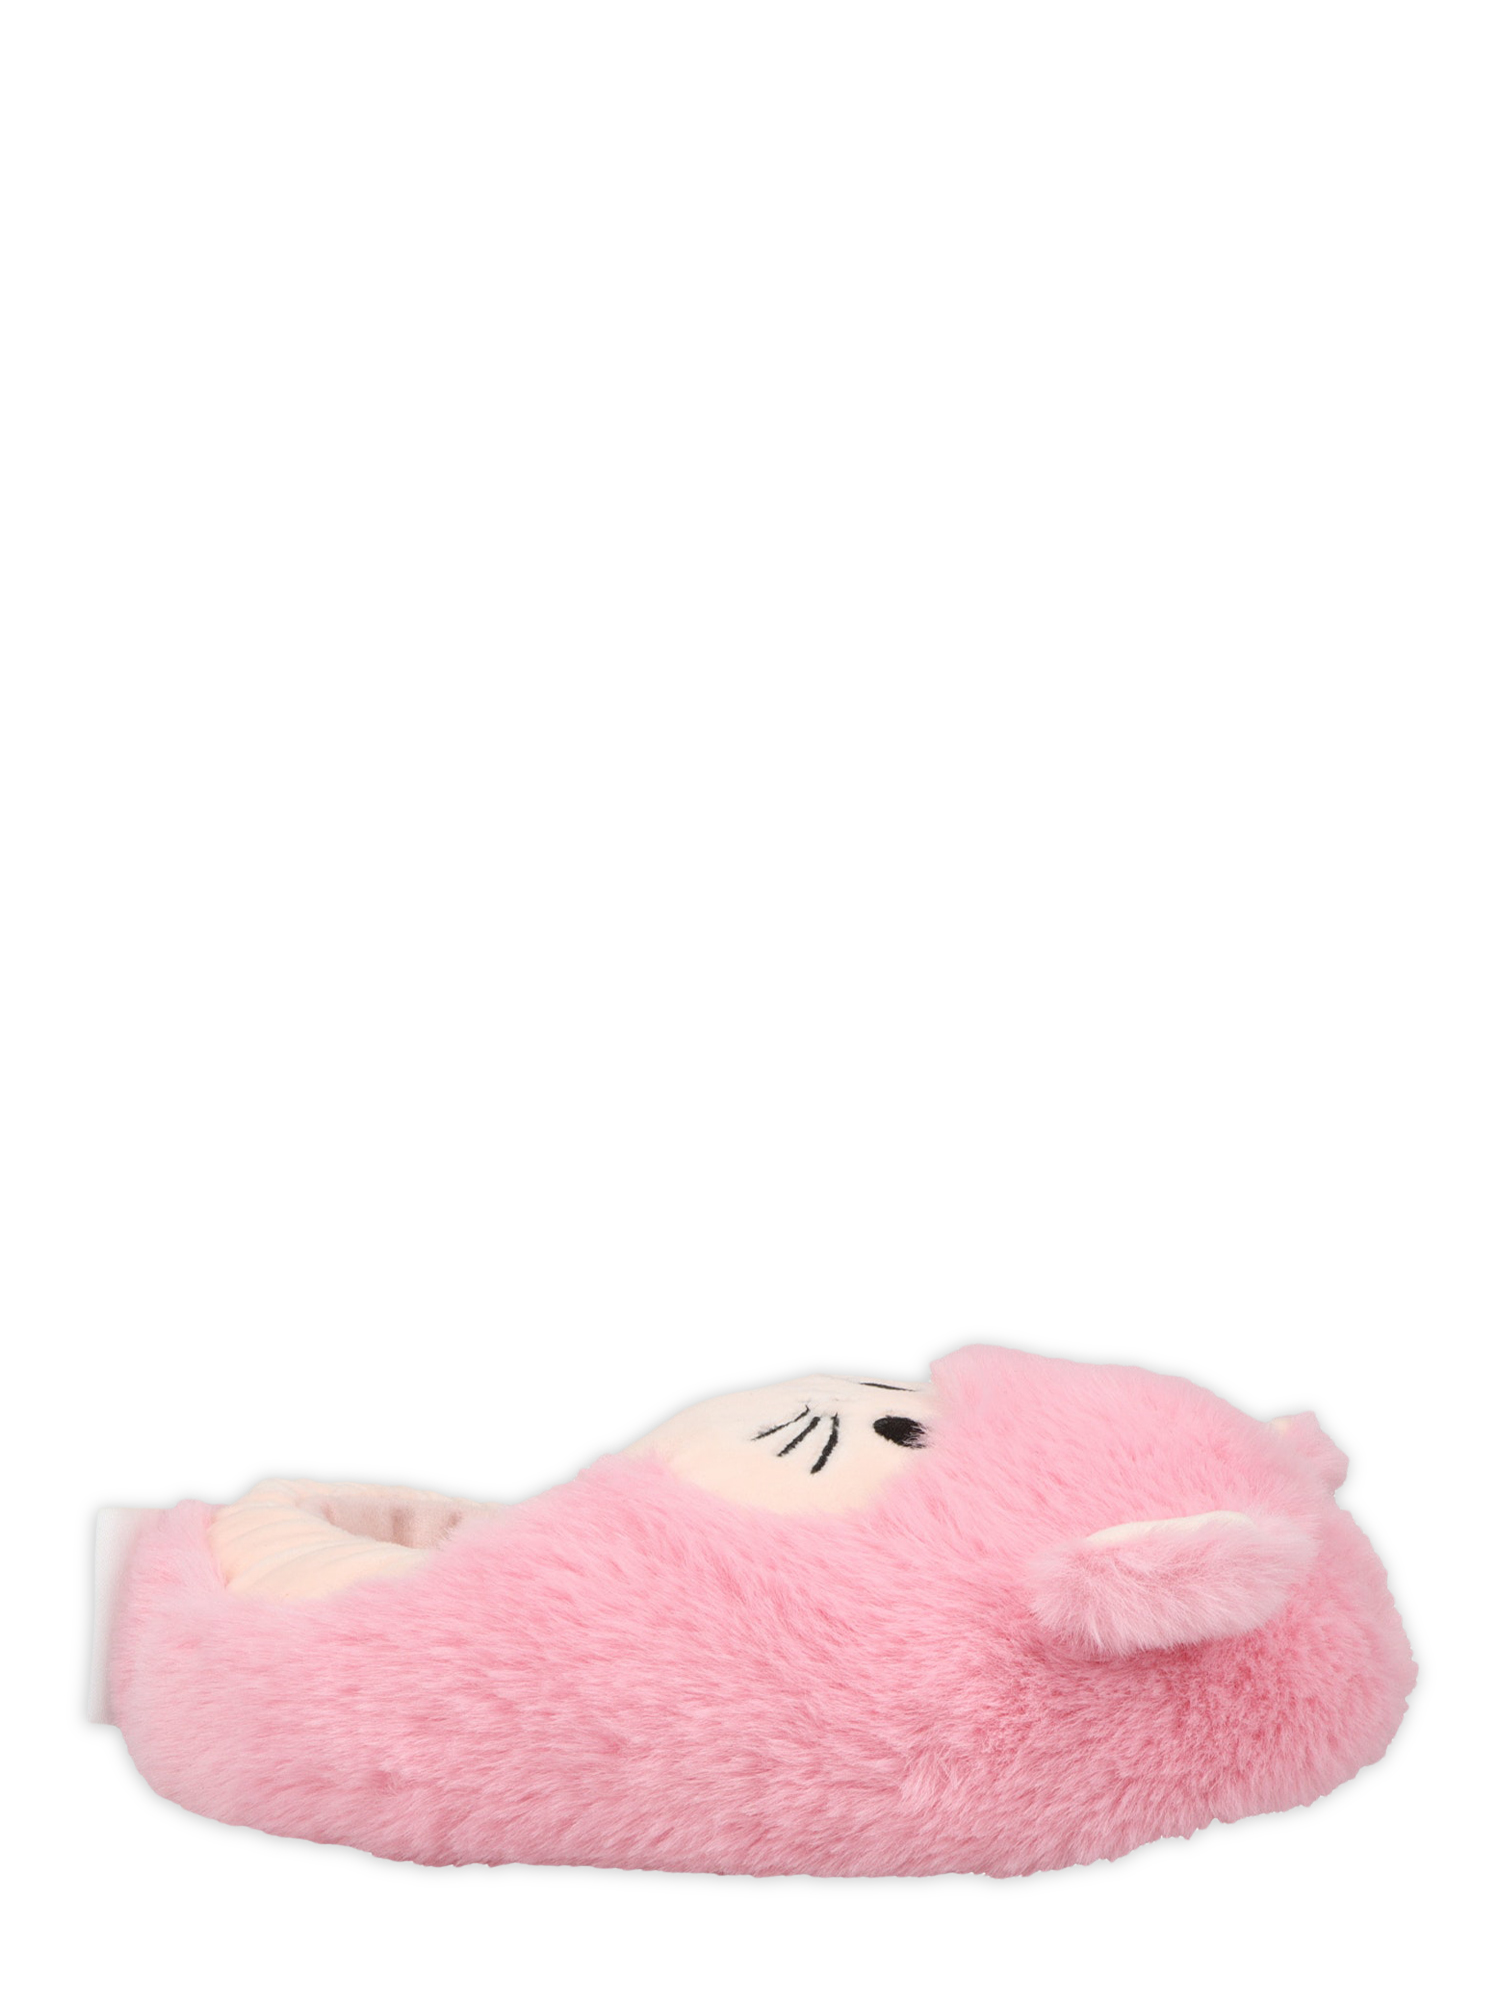 Squishmallows Toddler & Kids Anu the Hamster Slipper - image 2 of 6